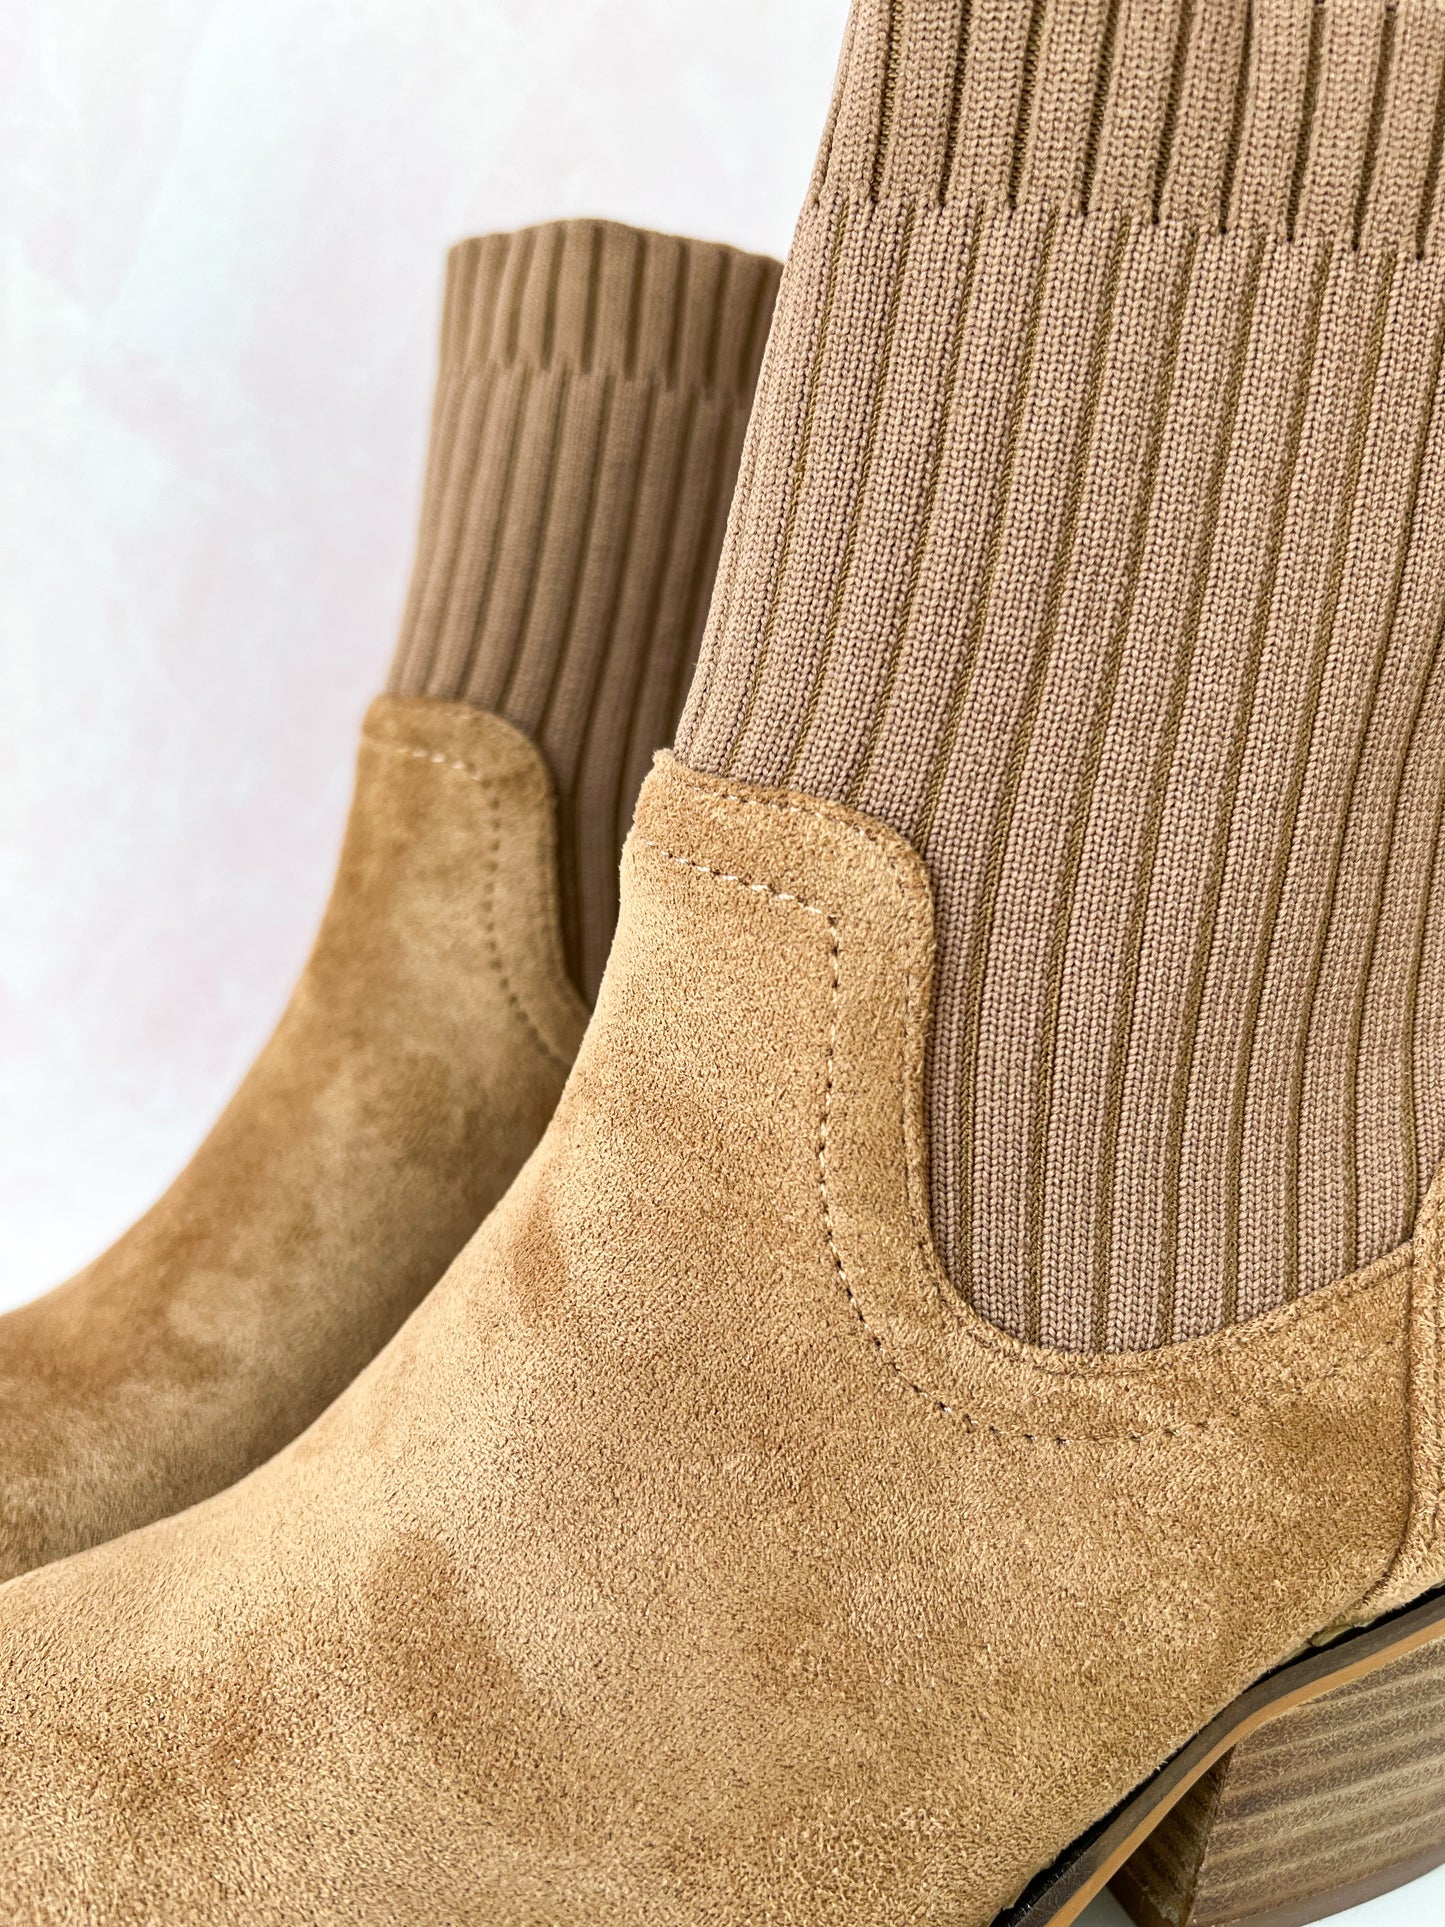 Corky's Crackling Boot - Camel Suede